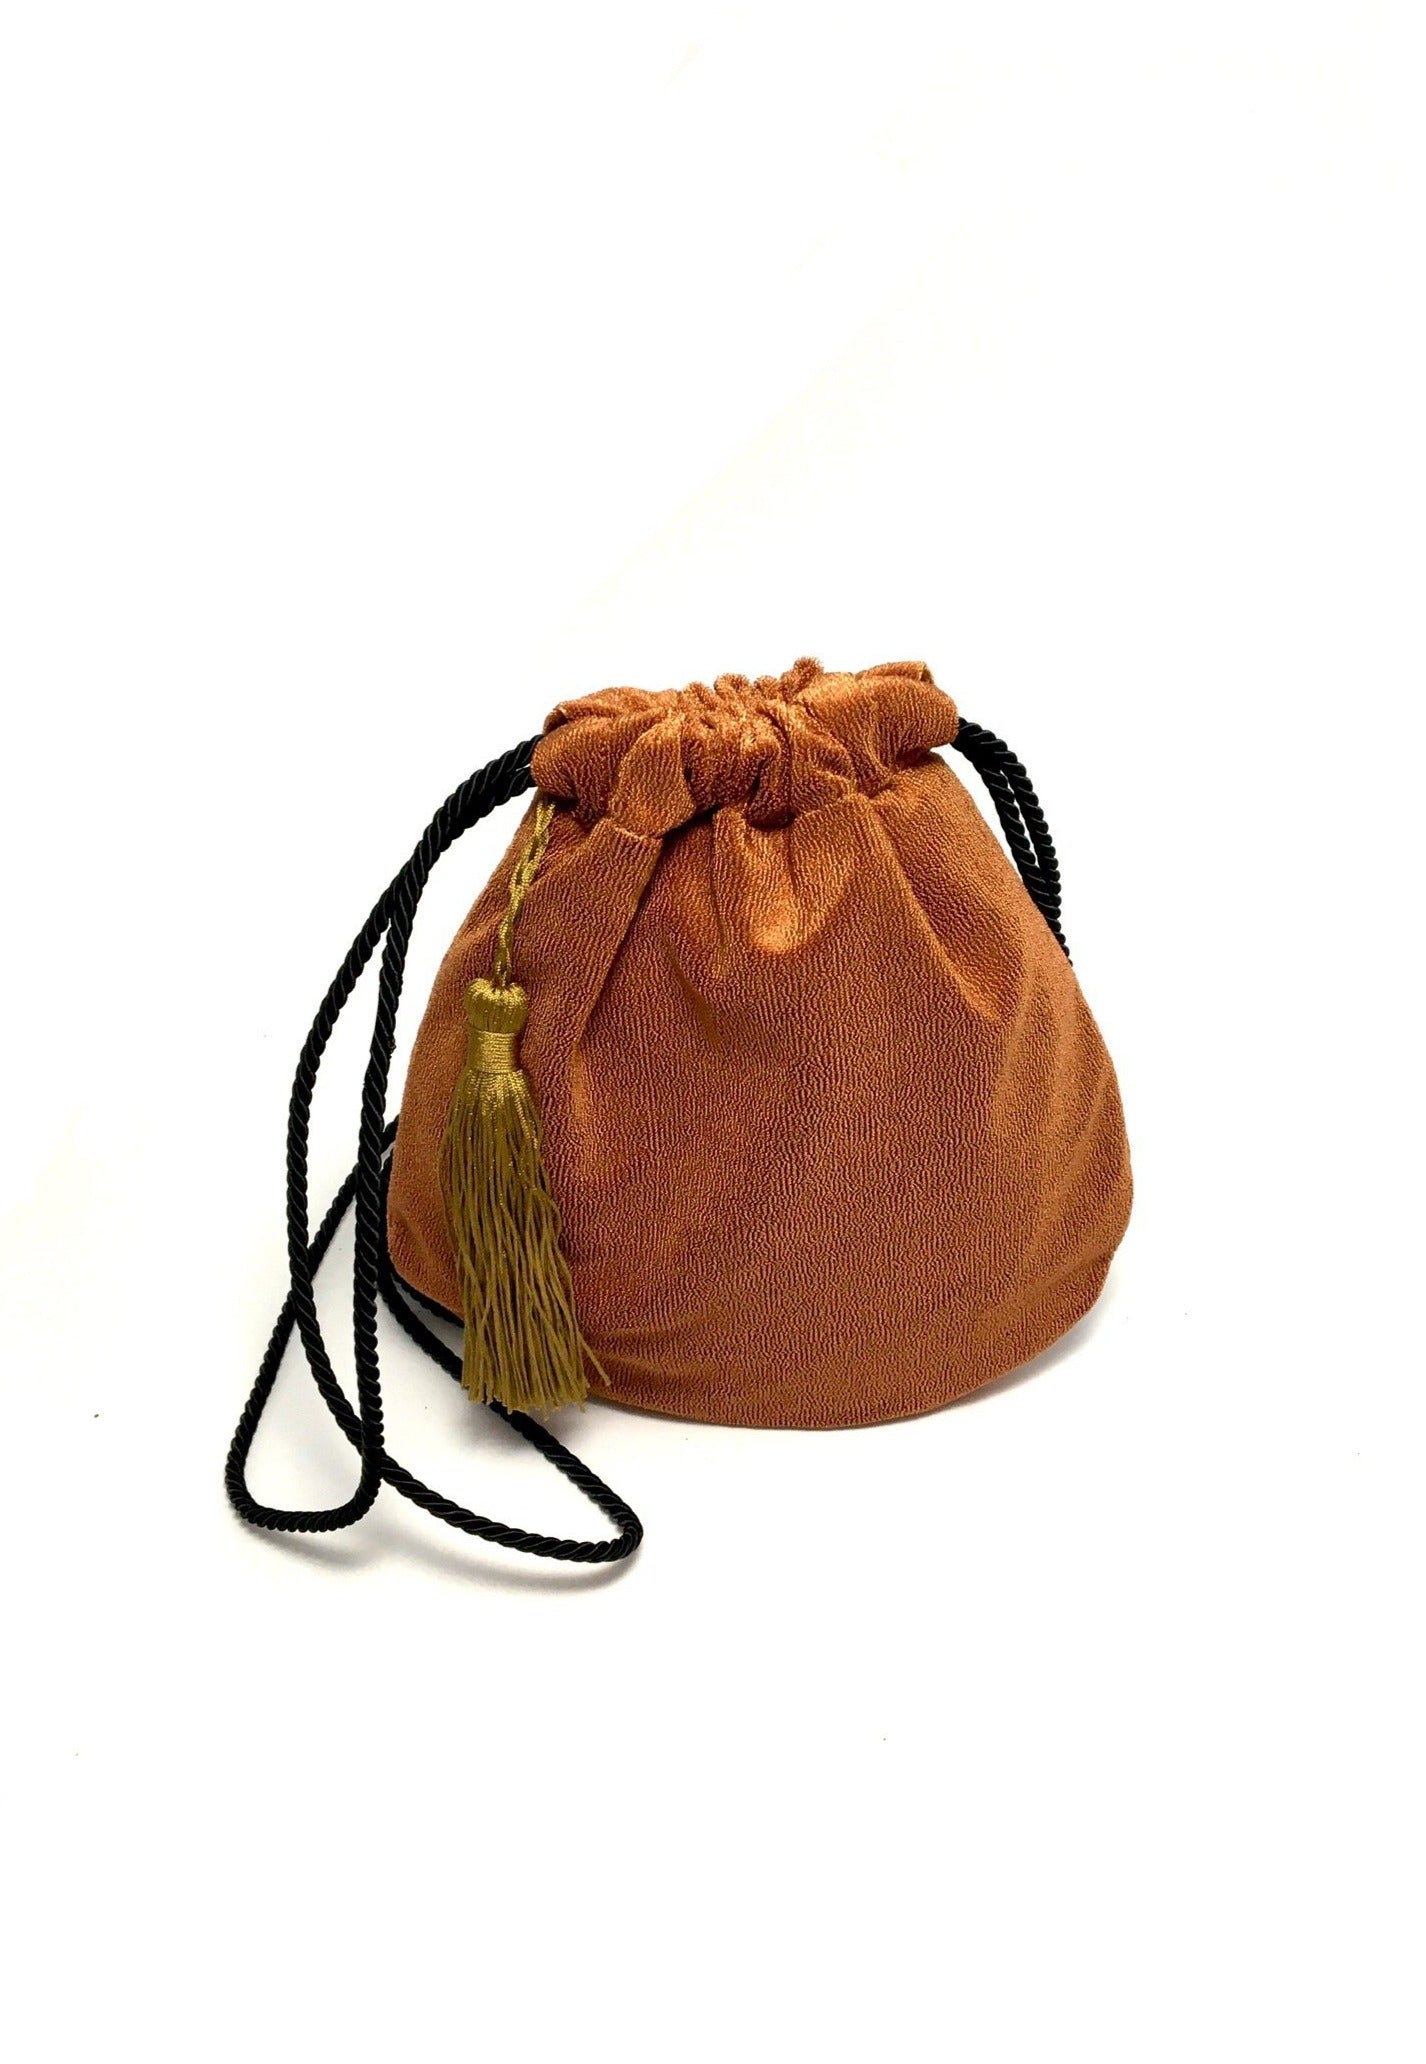 Copper recycled bag with tassel